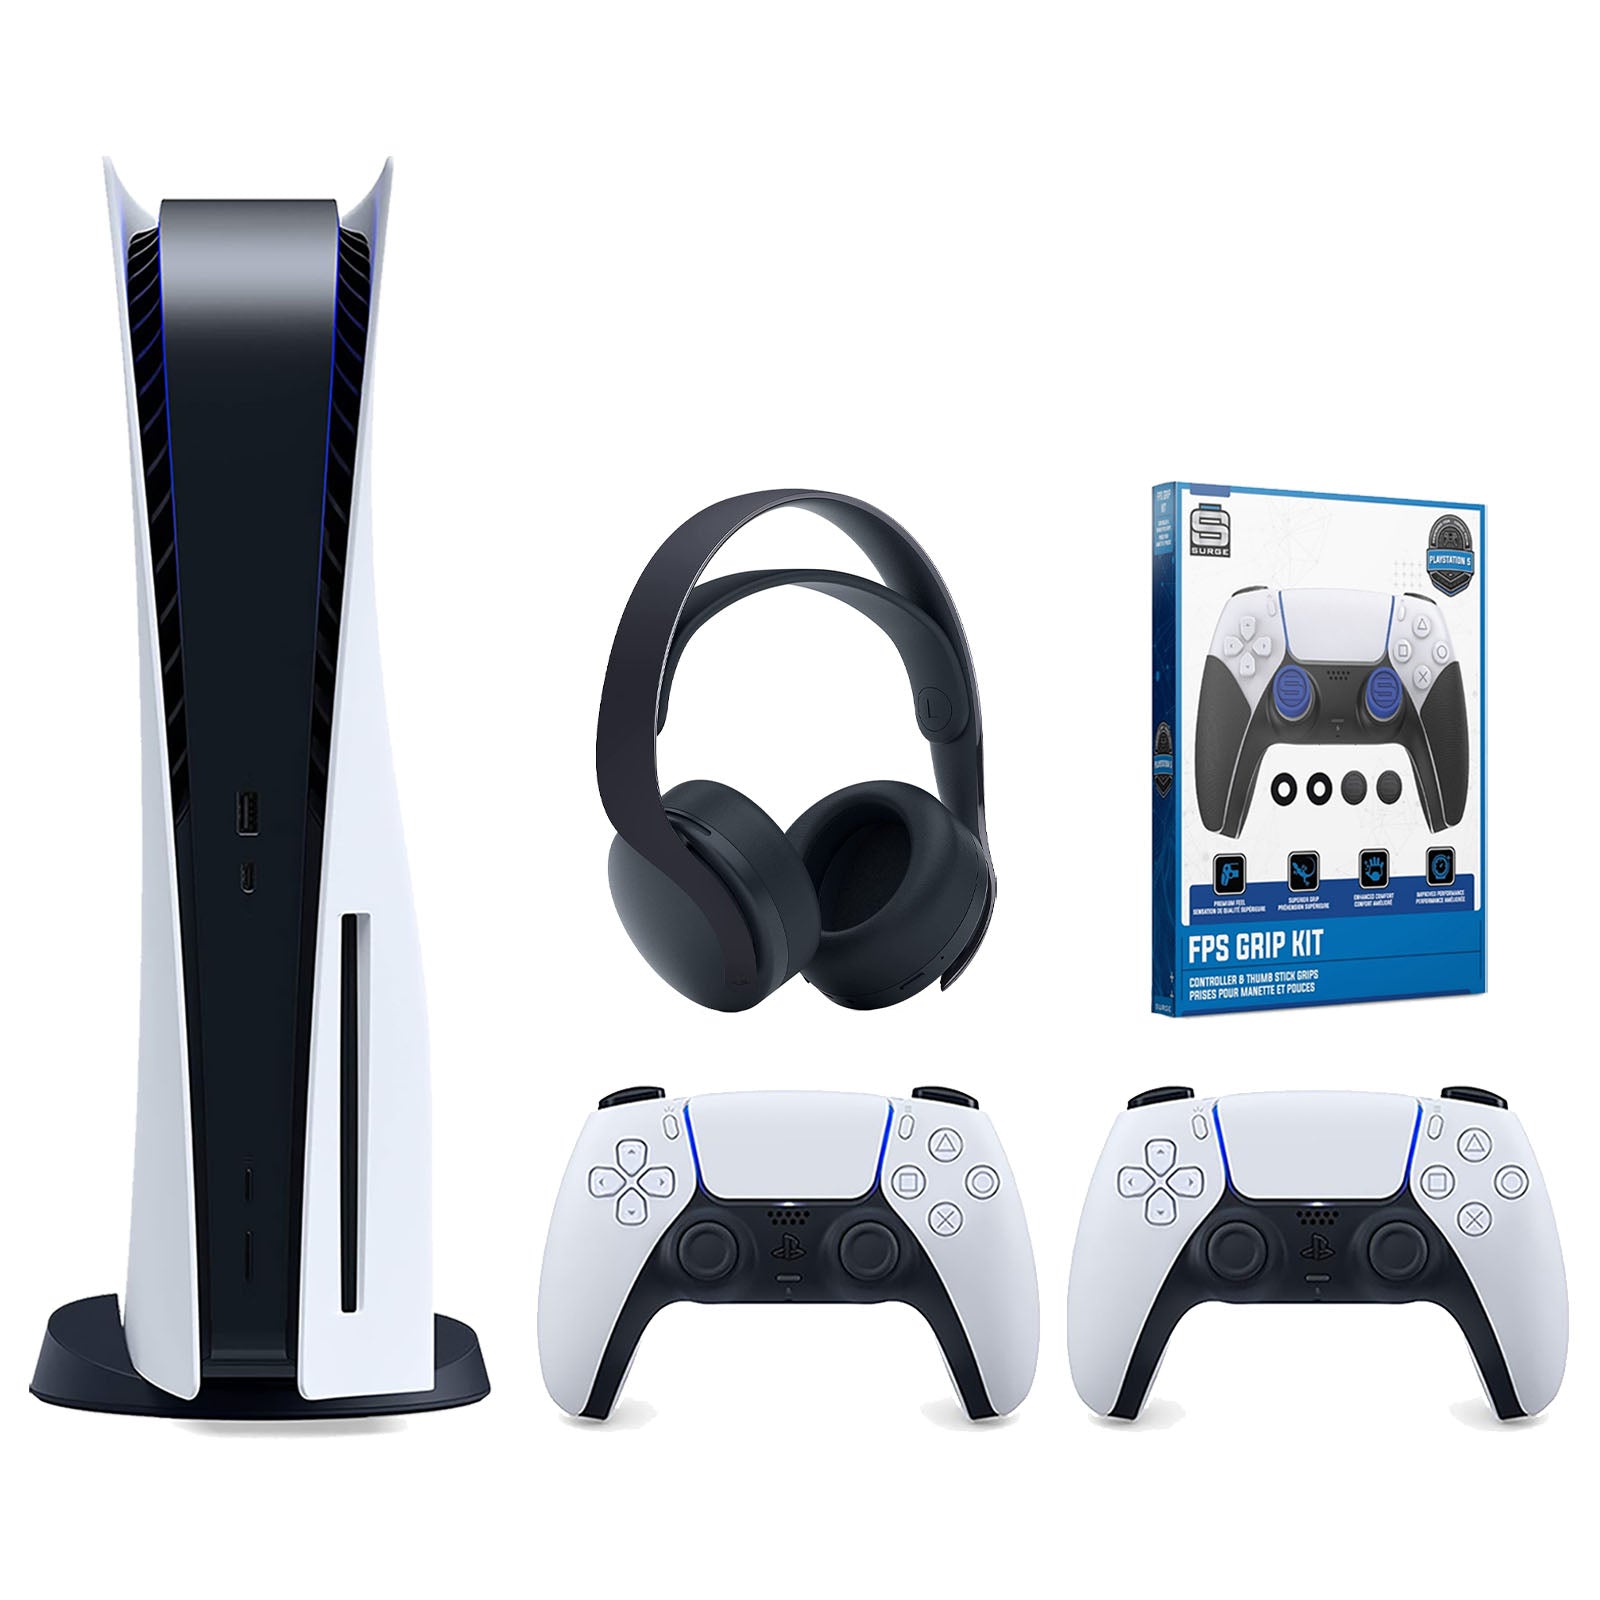 Sony Playstation 5 Disc Version Console with Extra White Controller, Black PULSE 3D Headset and Surge FPS Grip Kit With Precision Aiming Rings Bundle - Pro-Distributing